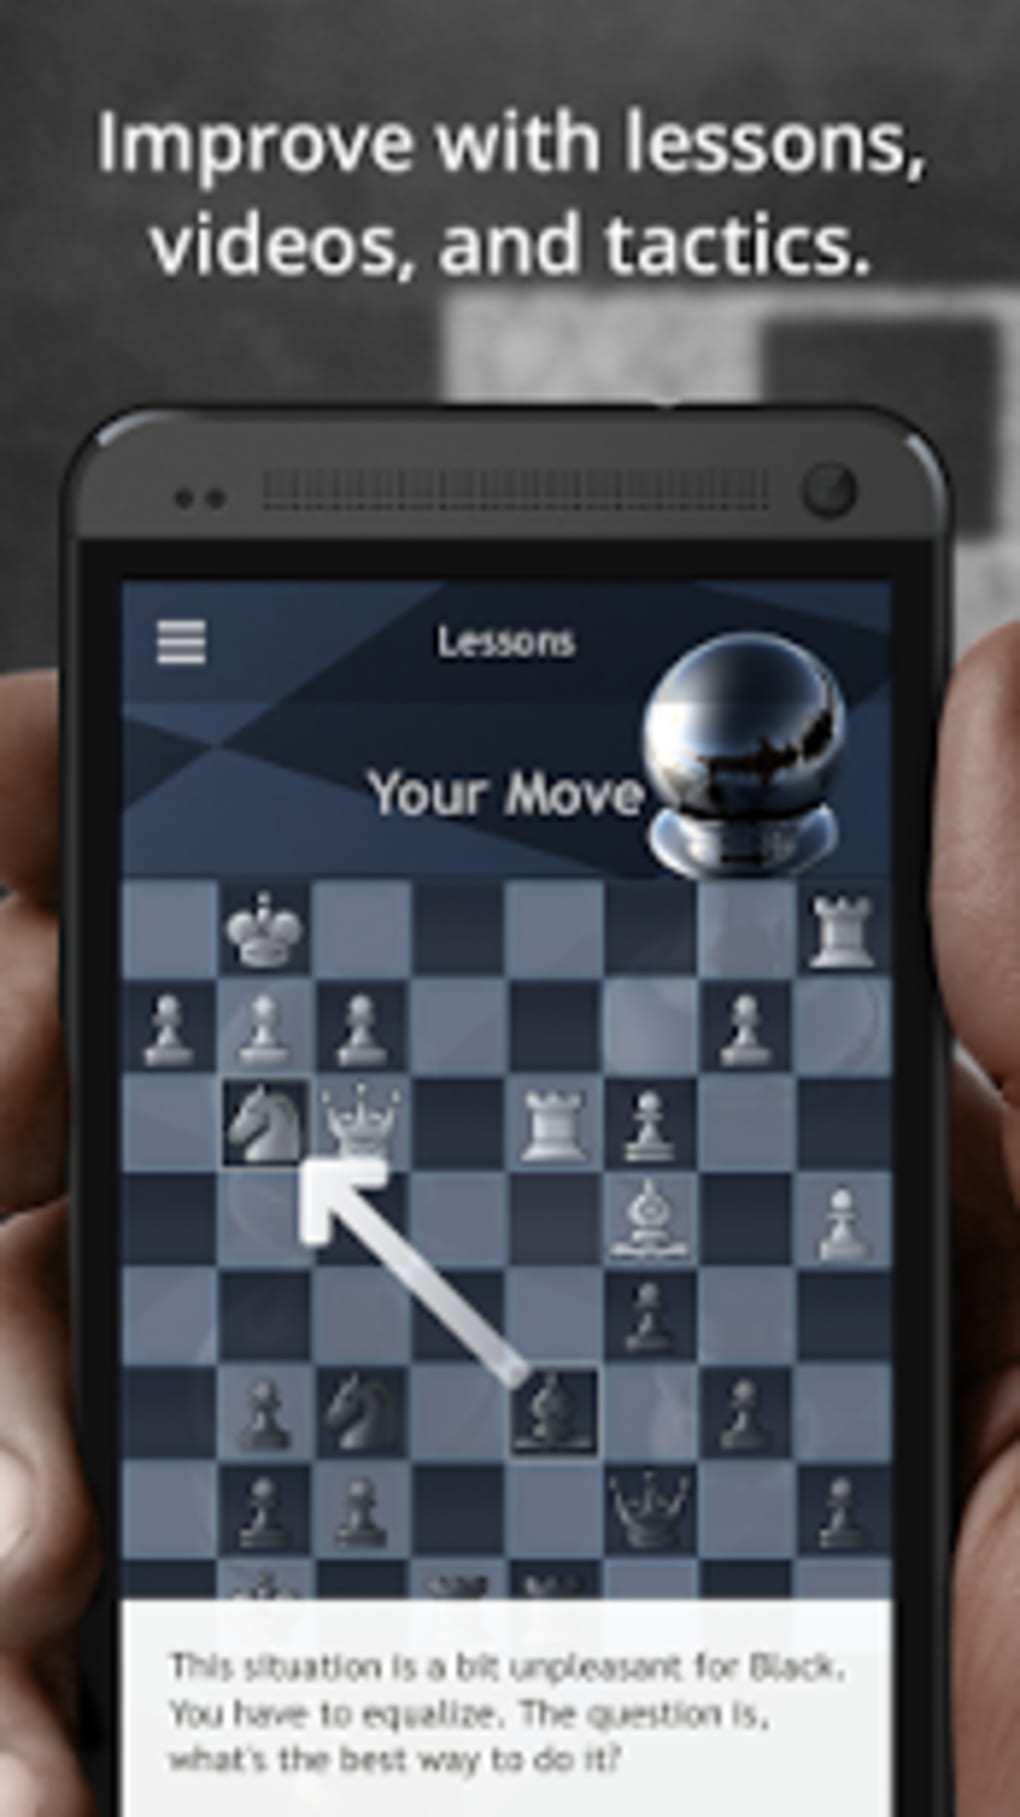 Chessle for Android - Free App Download